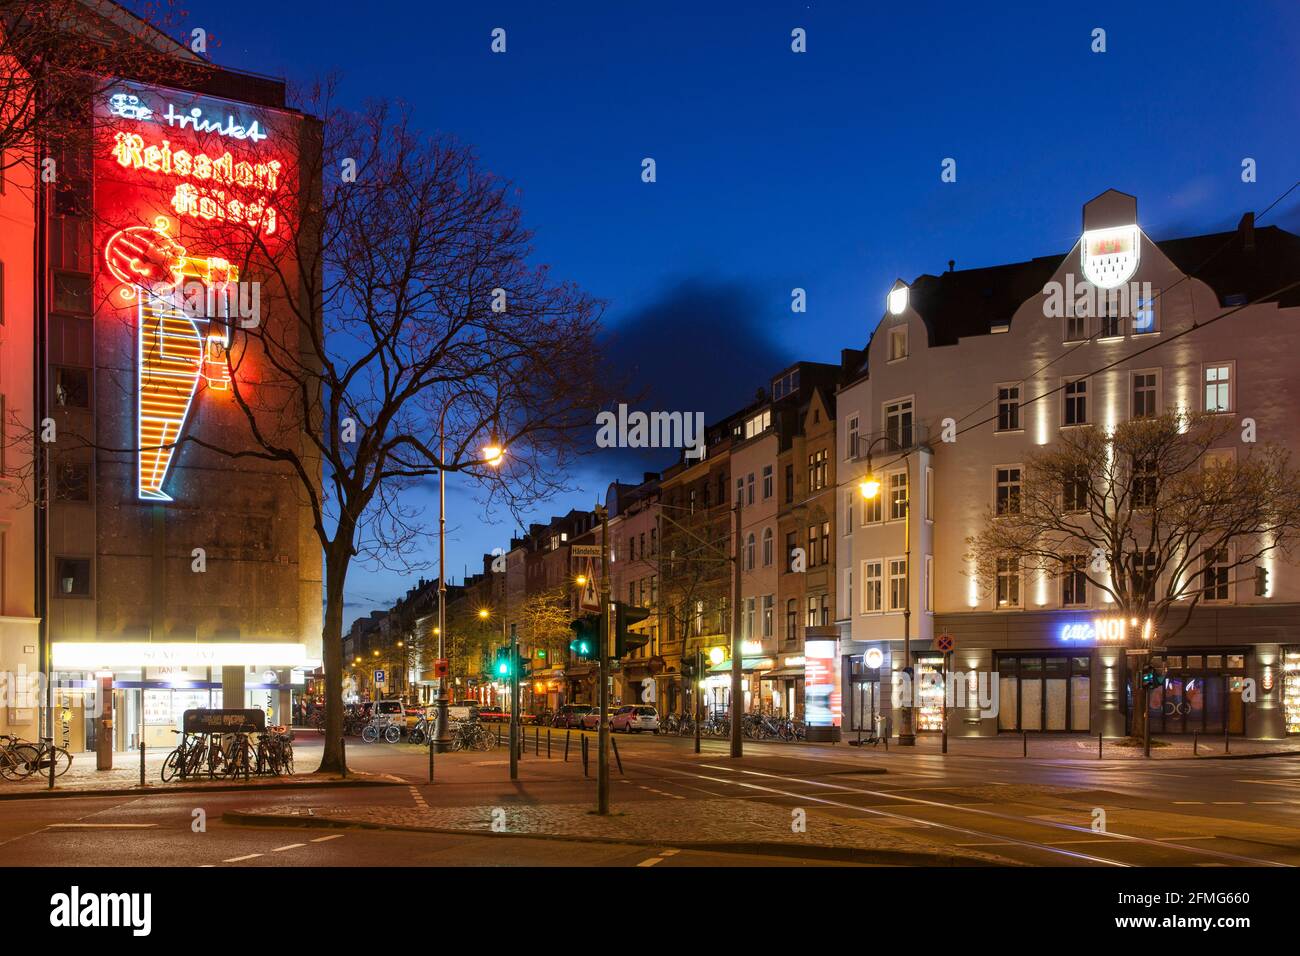 curfew from 9 pm during corona pandemic lockdown on May 5th. 2021. The deserted Aachener street at Rudolfplatz square, neon sign of the Reissdorf brew Stock Photo